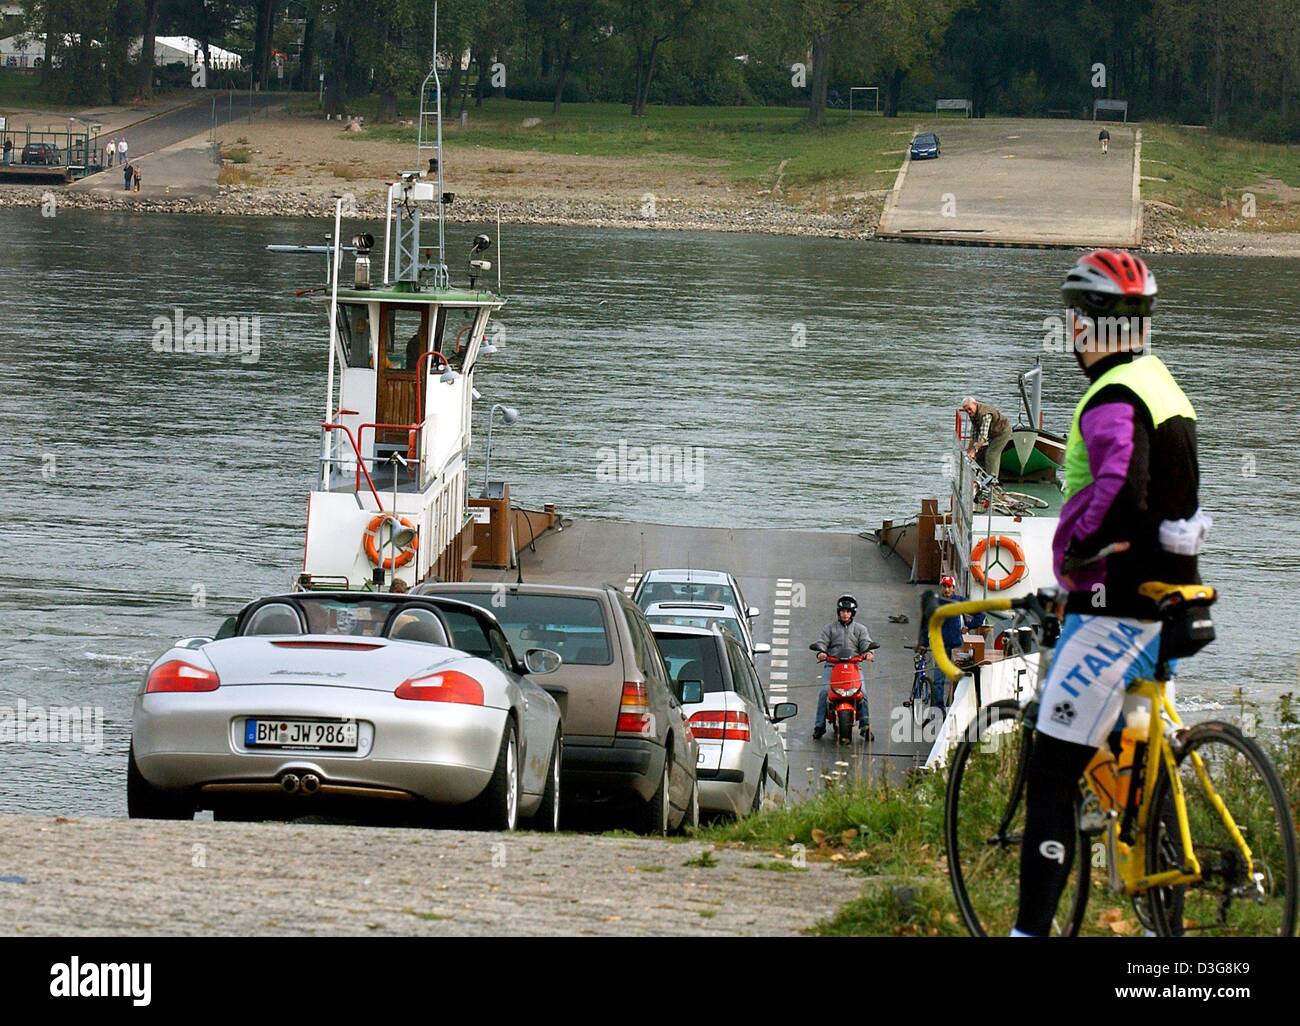 (dpa) - Cars are queuing to get on the car ferry to take them across the River Rhine, north of Cologne, 1 October 2003. The ferry is the connection between northern Cologne and Hitdorf for commuters. The ramps are steep this year due to the low water level of the River Rhine. Stock Photo